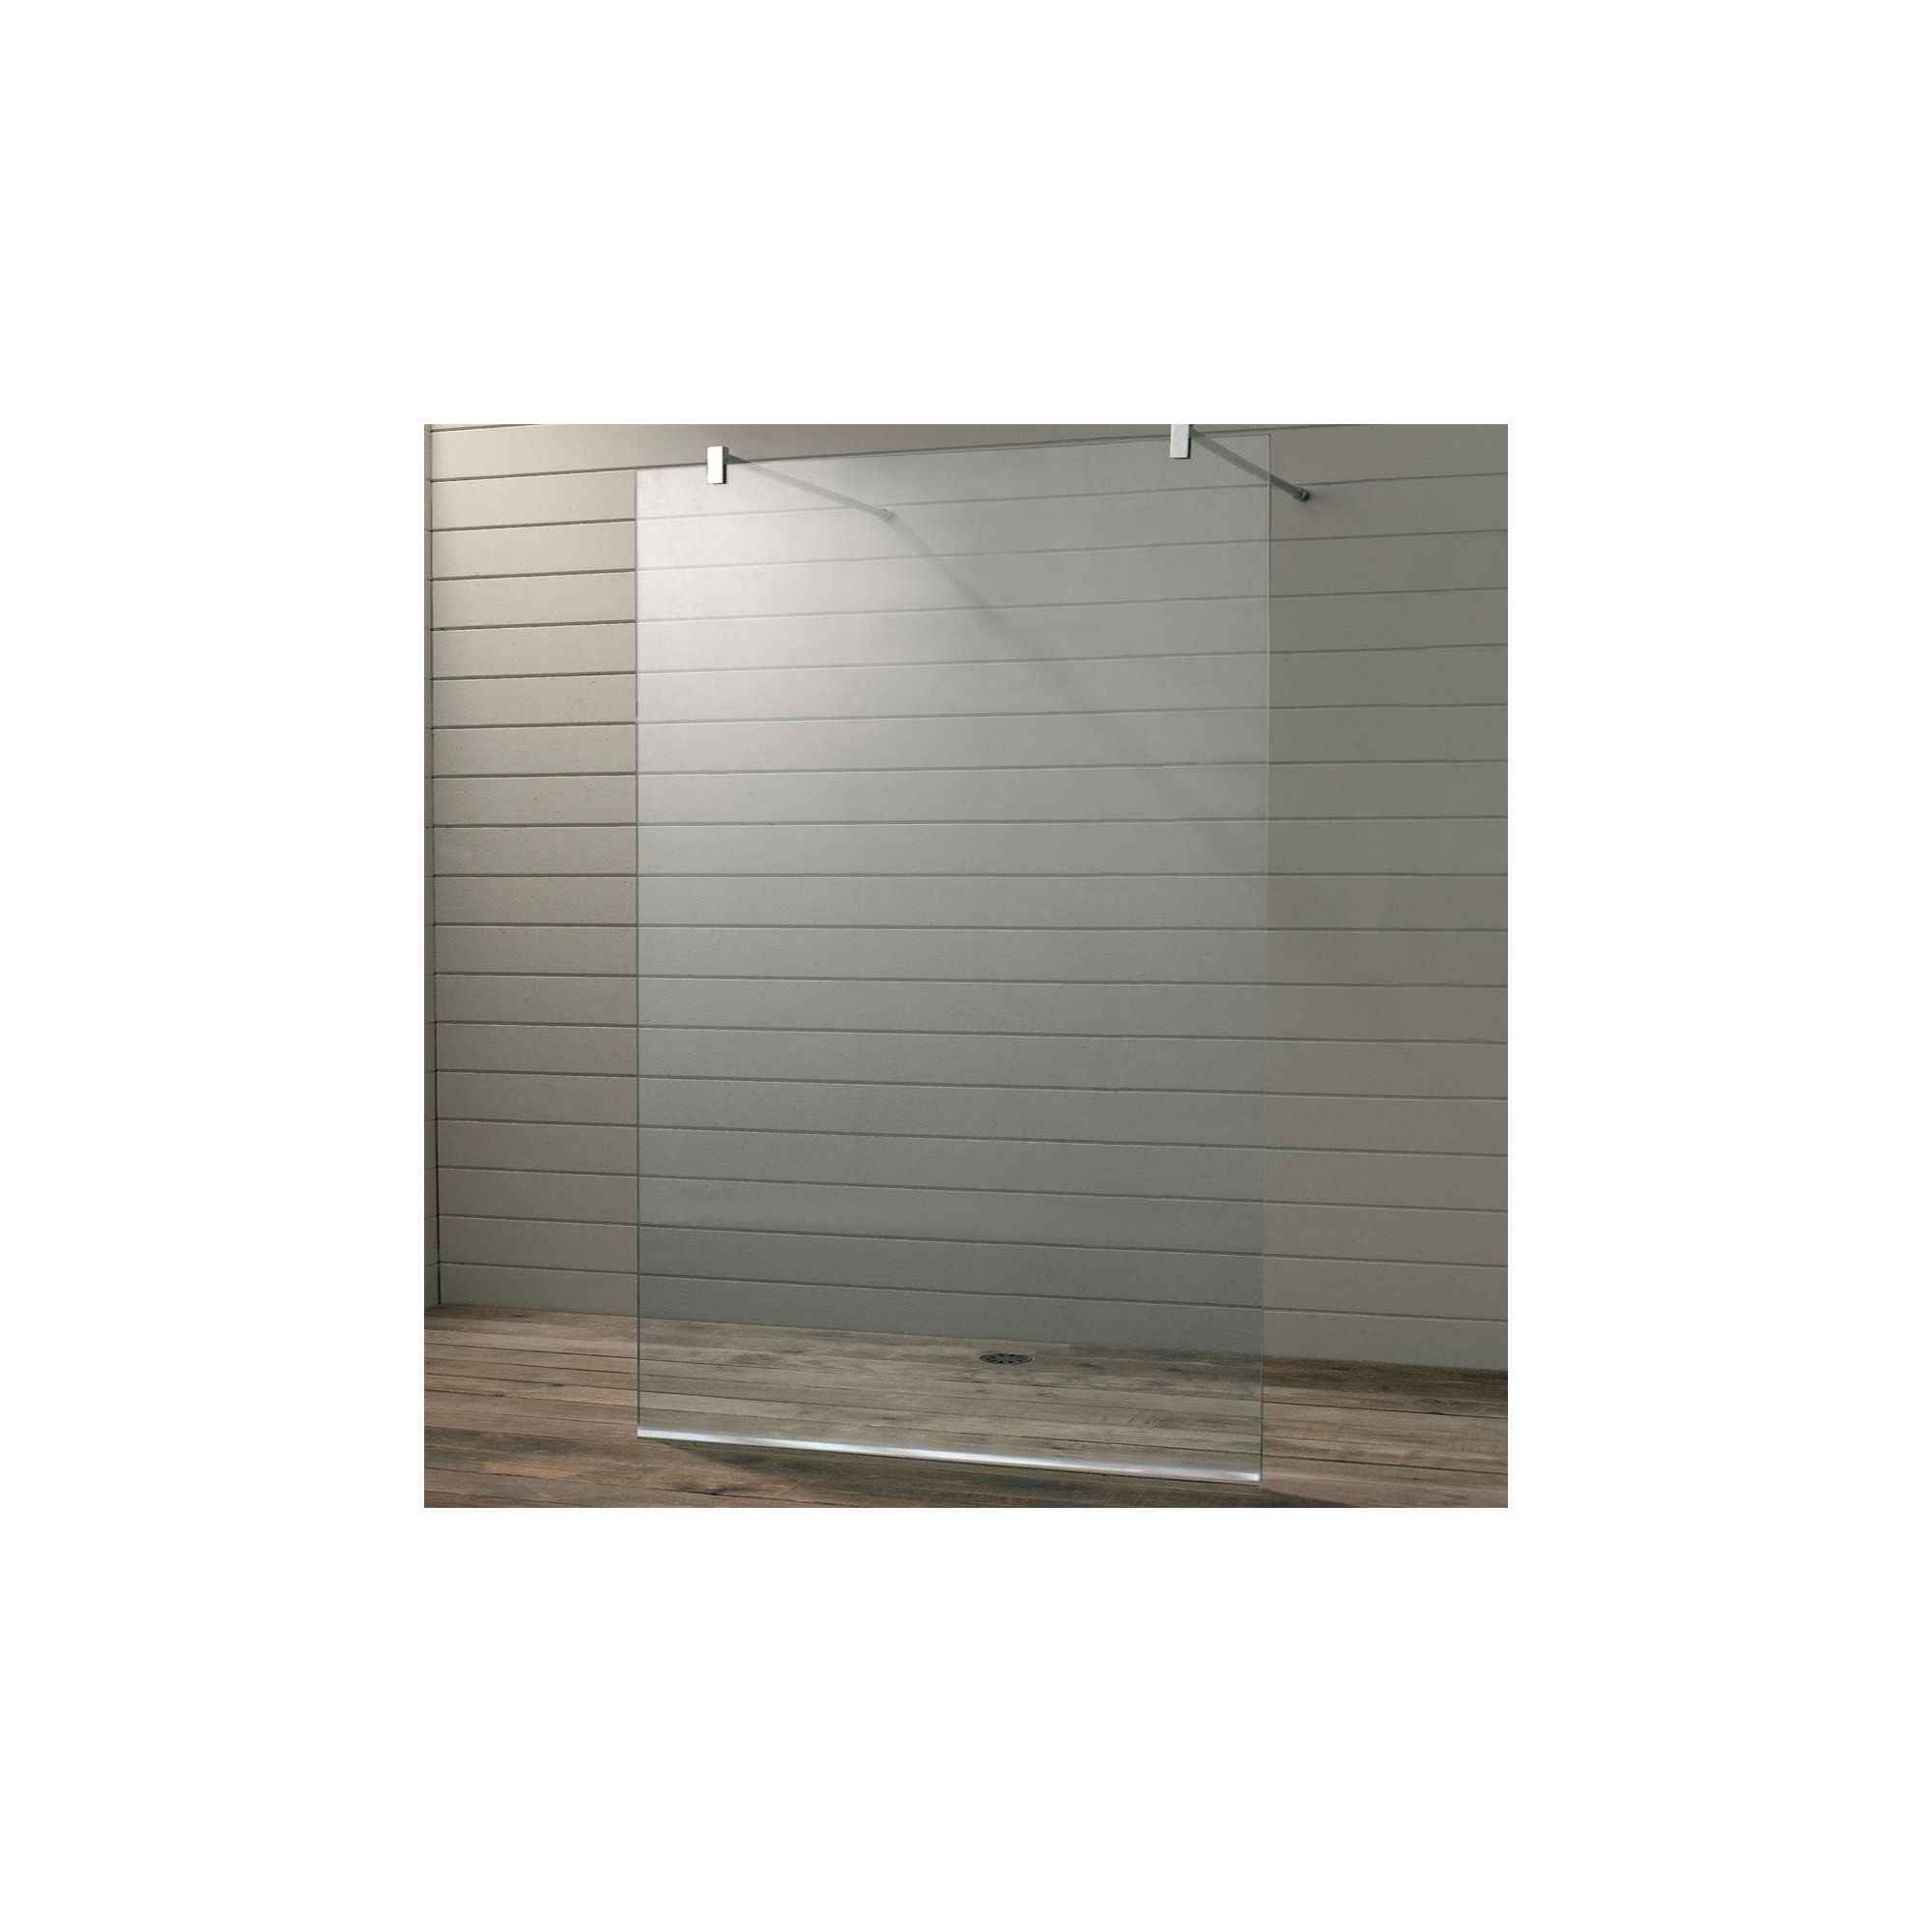 Duchy Premium Wet Room Glass Shower Panel, 800mm x 760mm, 10mm Glass, Low Profile Tray at Tesco Direct